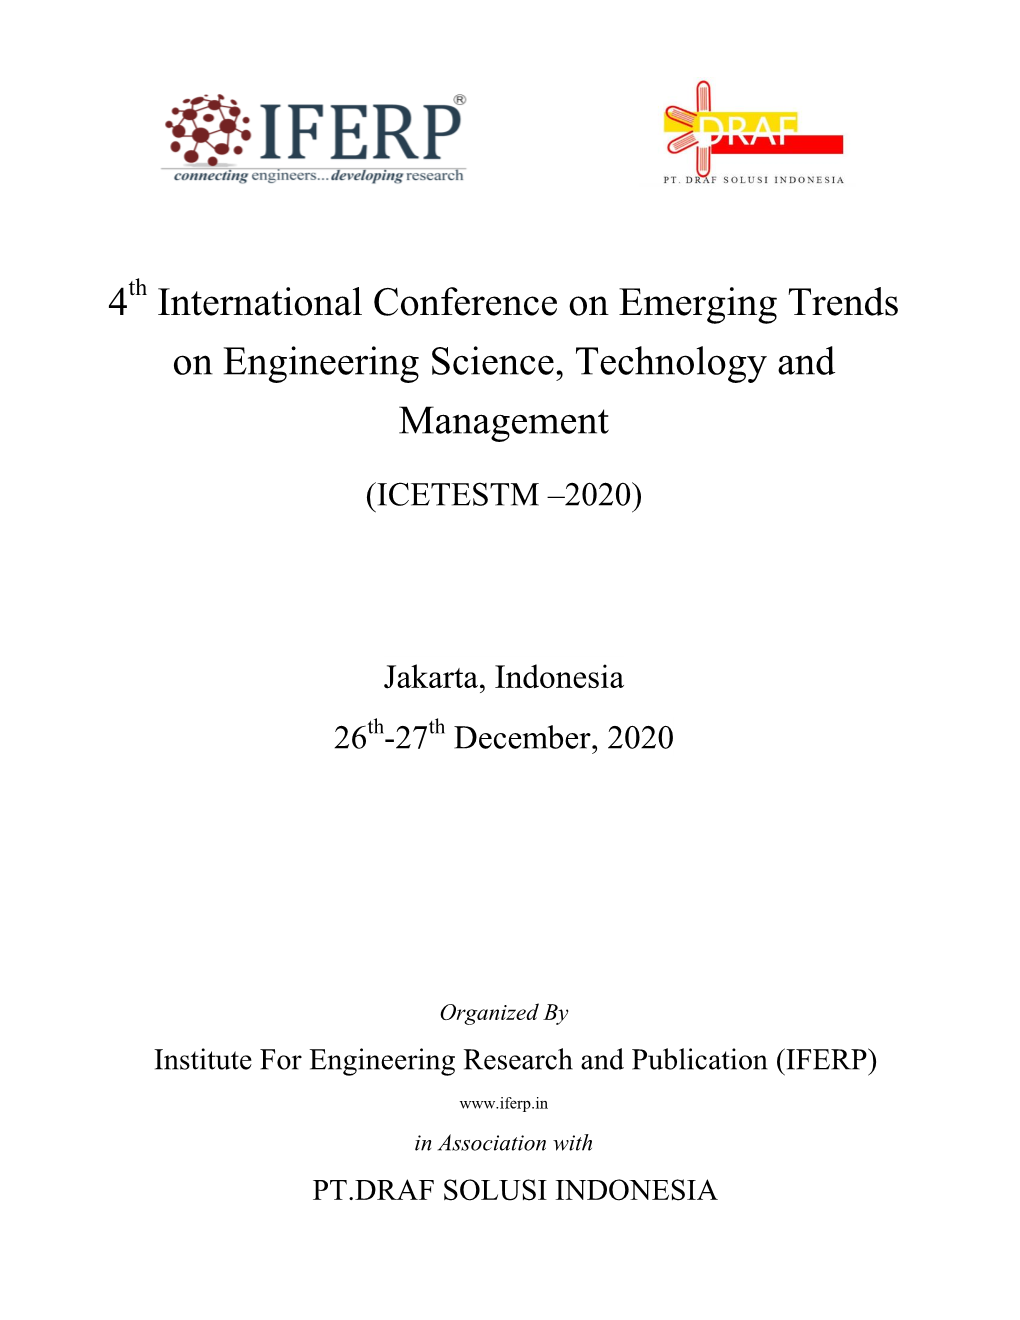 4 International Conference on Emerging Trends on Engineering Science, Technology and Management